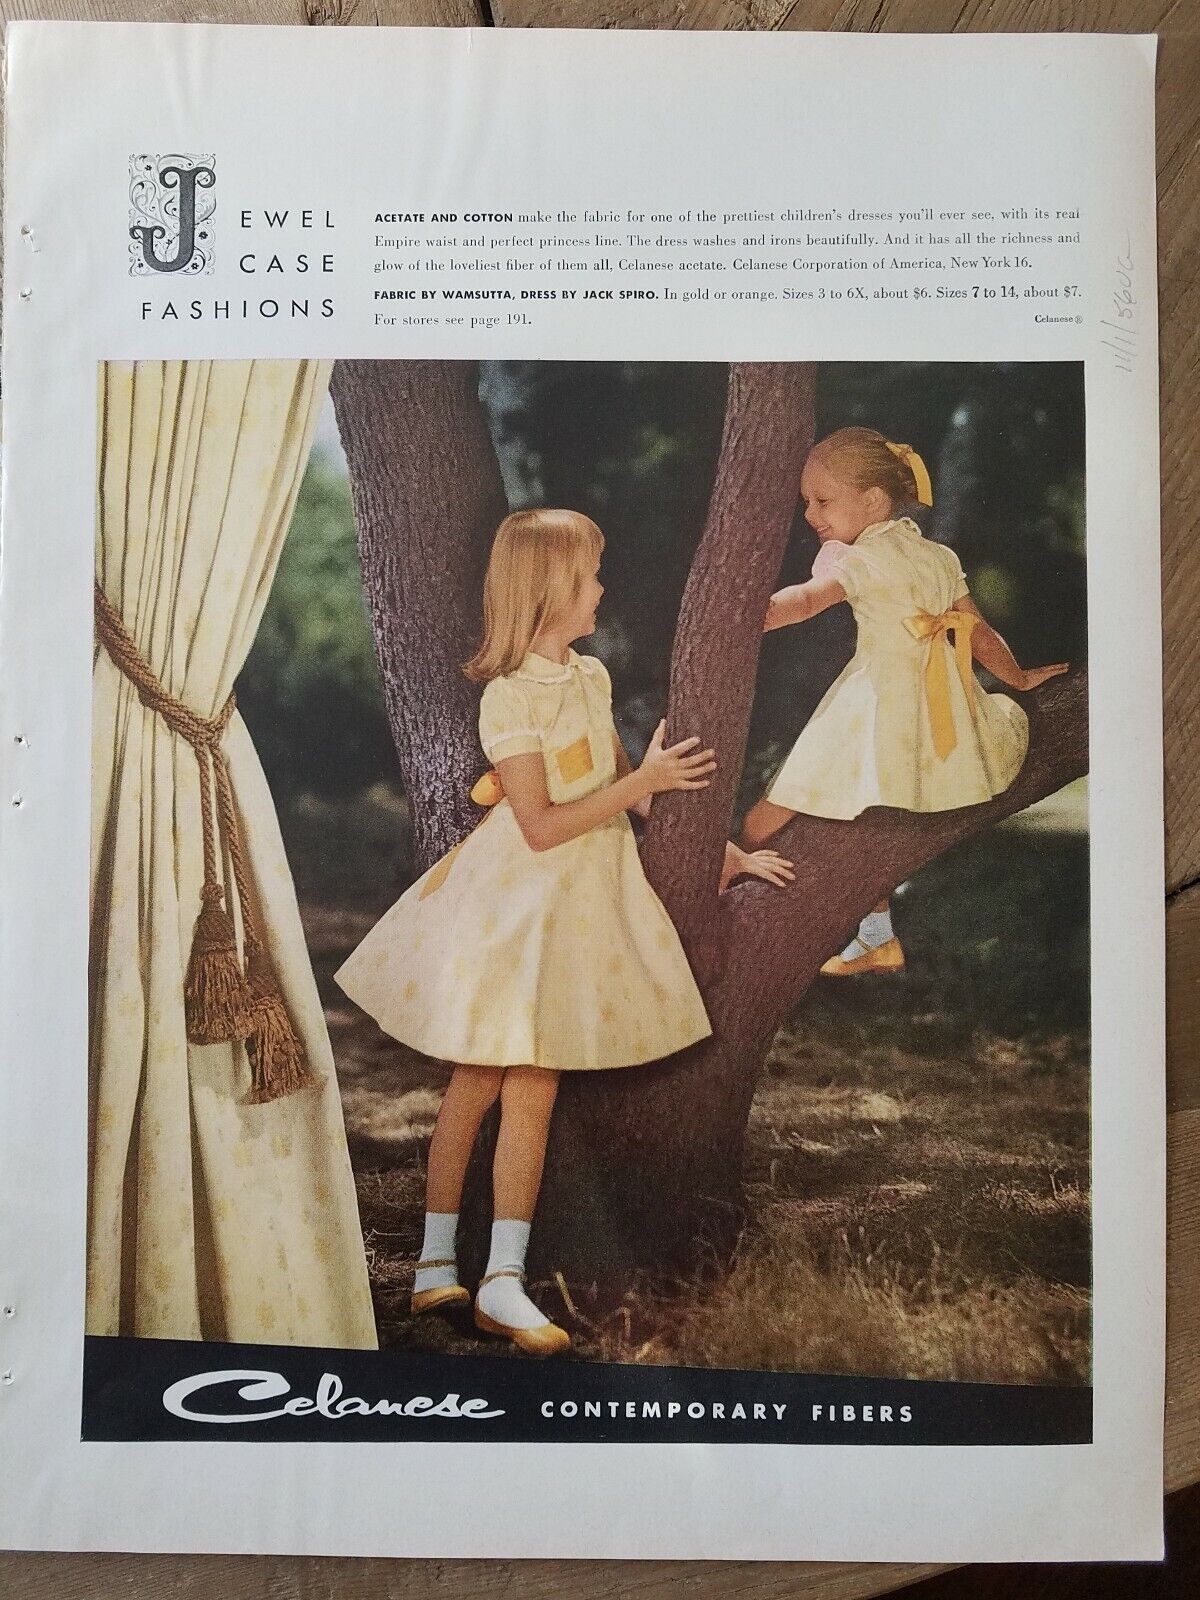 1956 Celanese contemporary fibers little girls yellow dresses by Jack Spiro ad